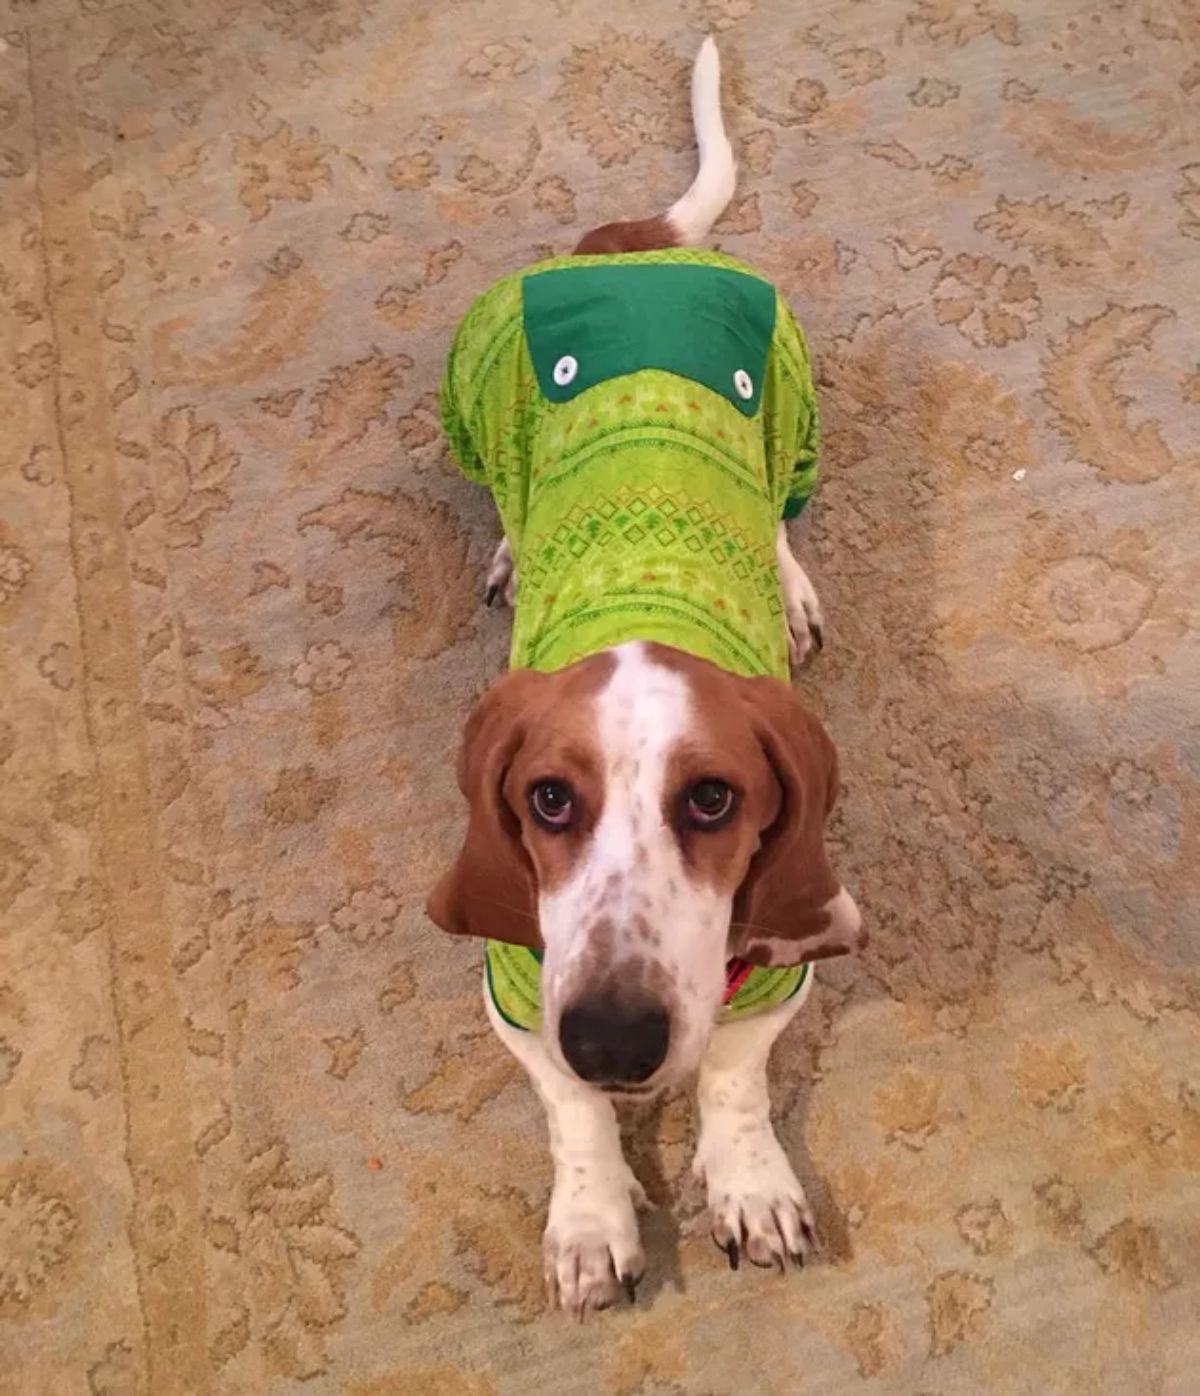 brown and white dog wearing a green patterned onesie